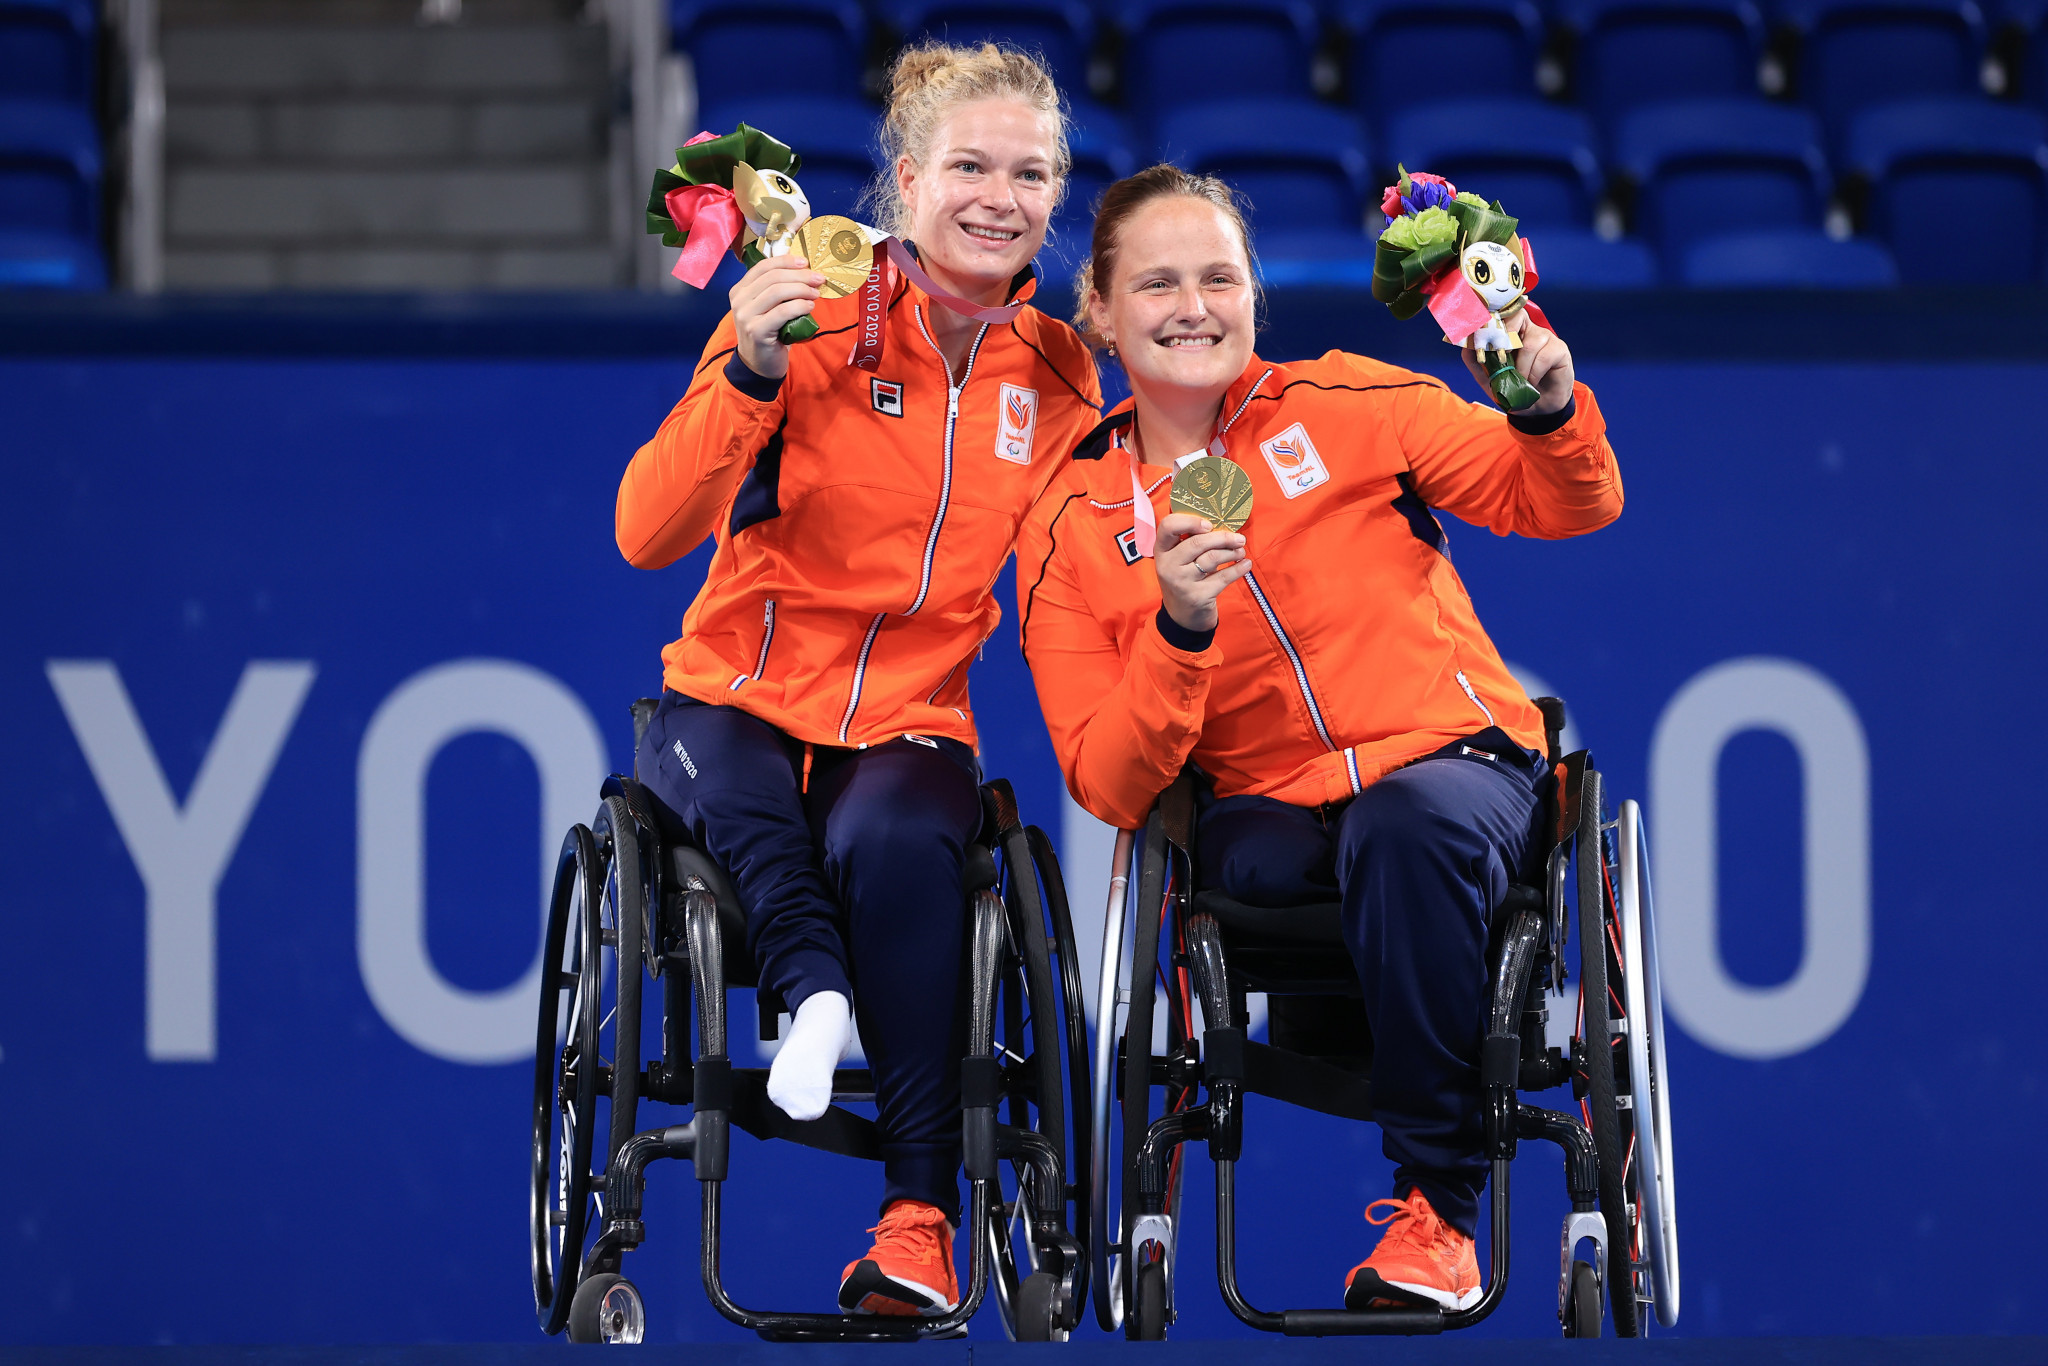 The Netherlands' Paralympic champions Diede de Groot and Aniek van Koot won a fifth consecutive women's doubles French Open title ©Getty Images